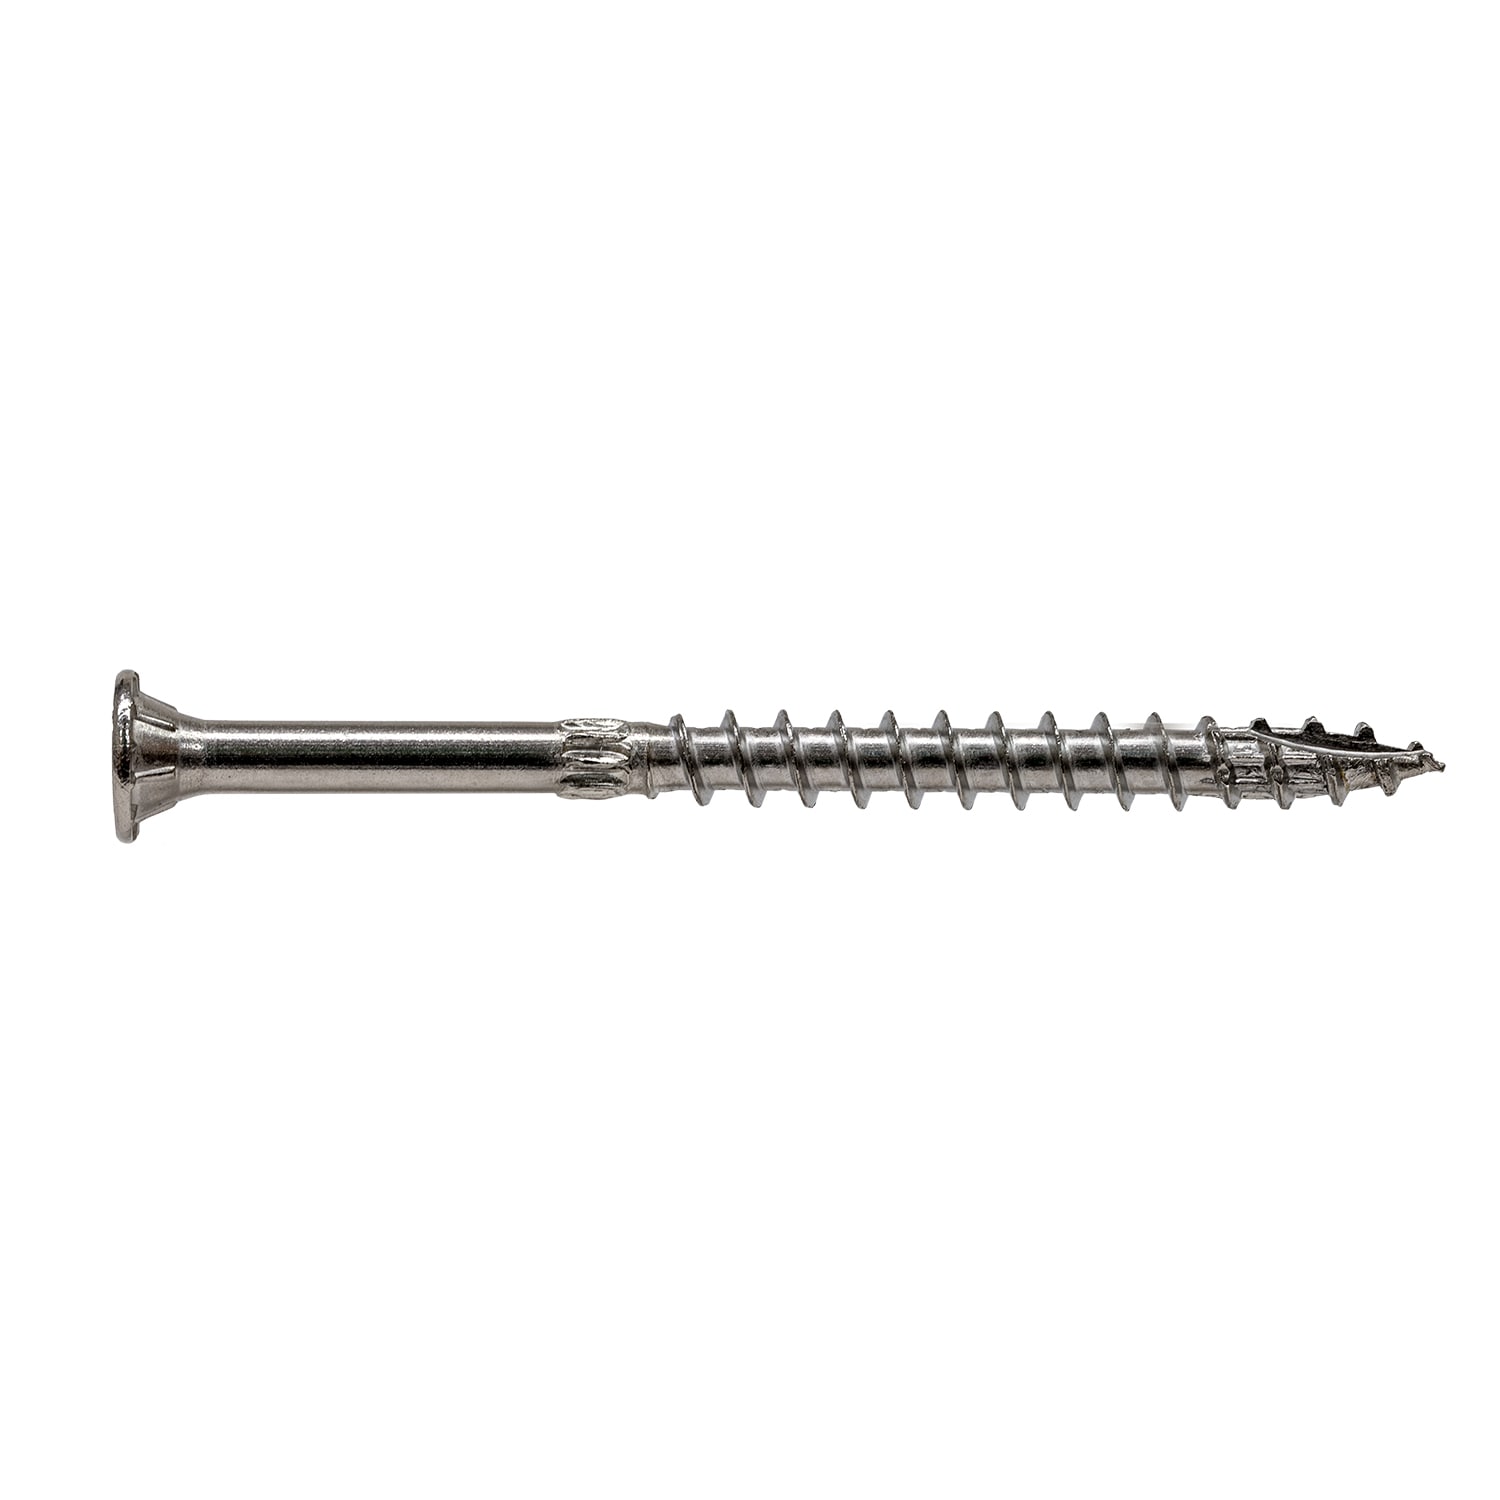 Sizes Available - 3 x 16-5 x 100 Timber Woodscrews 